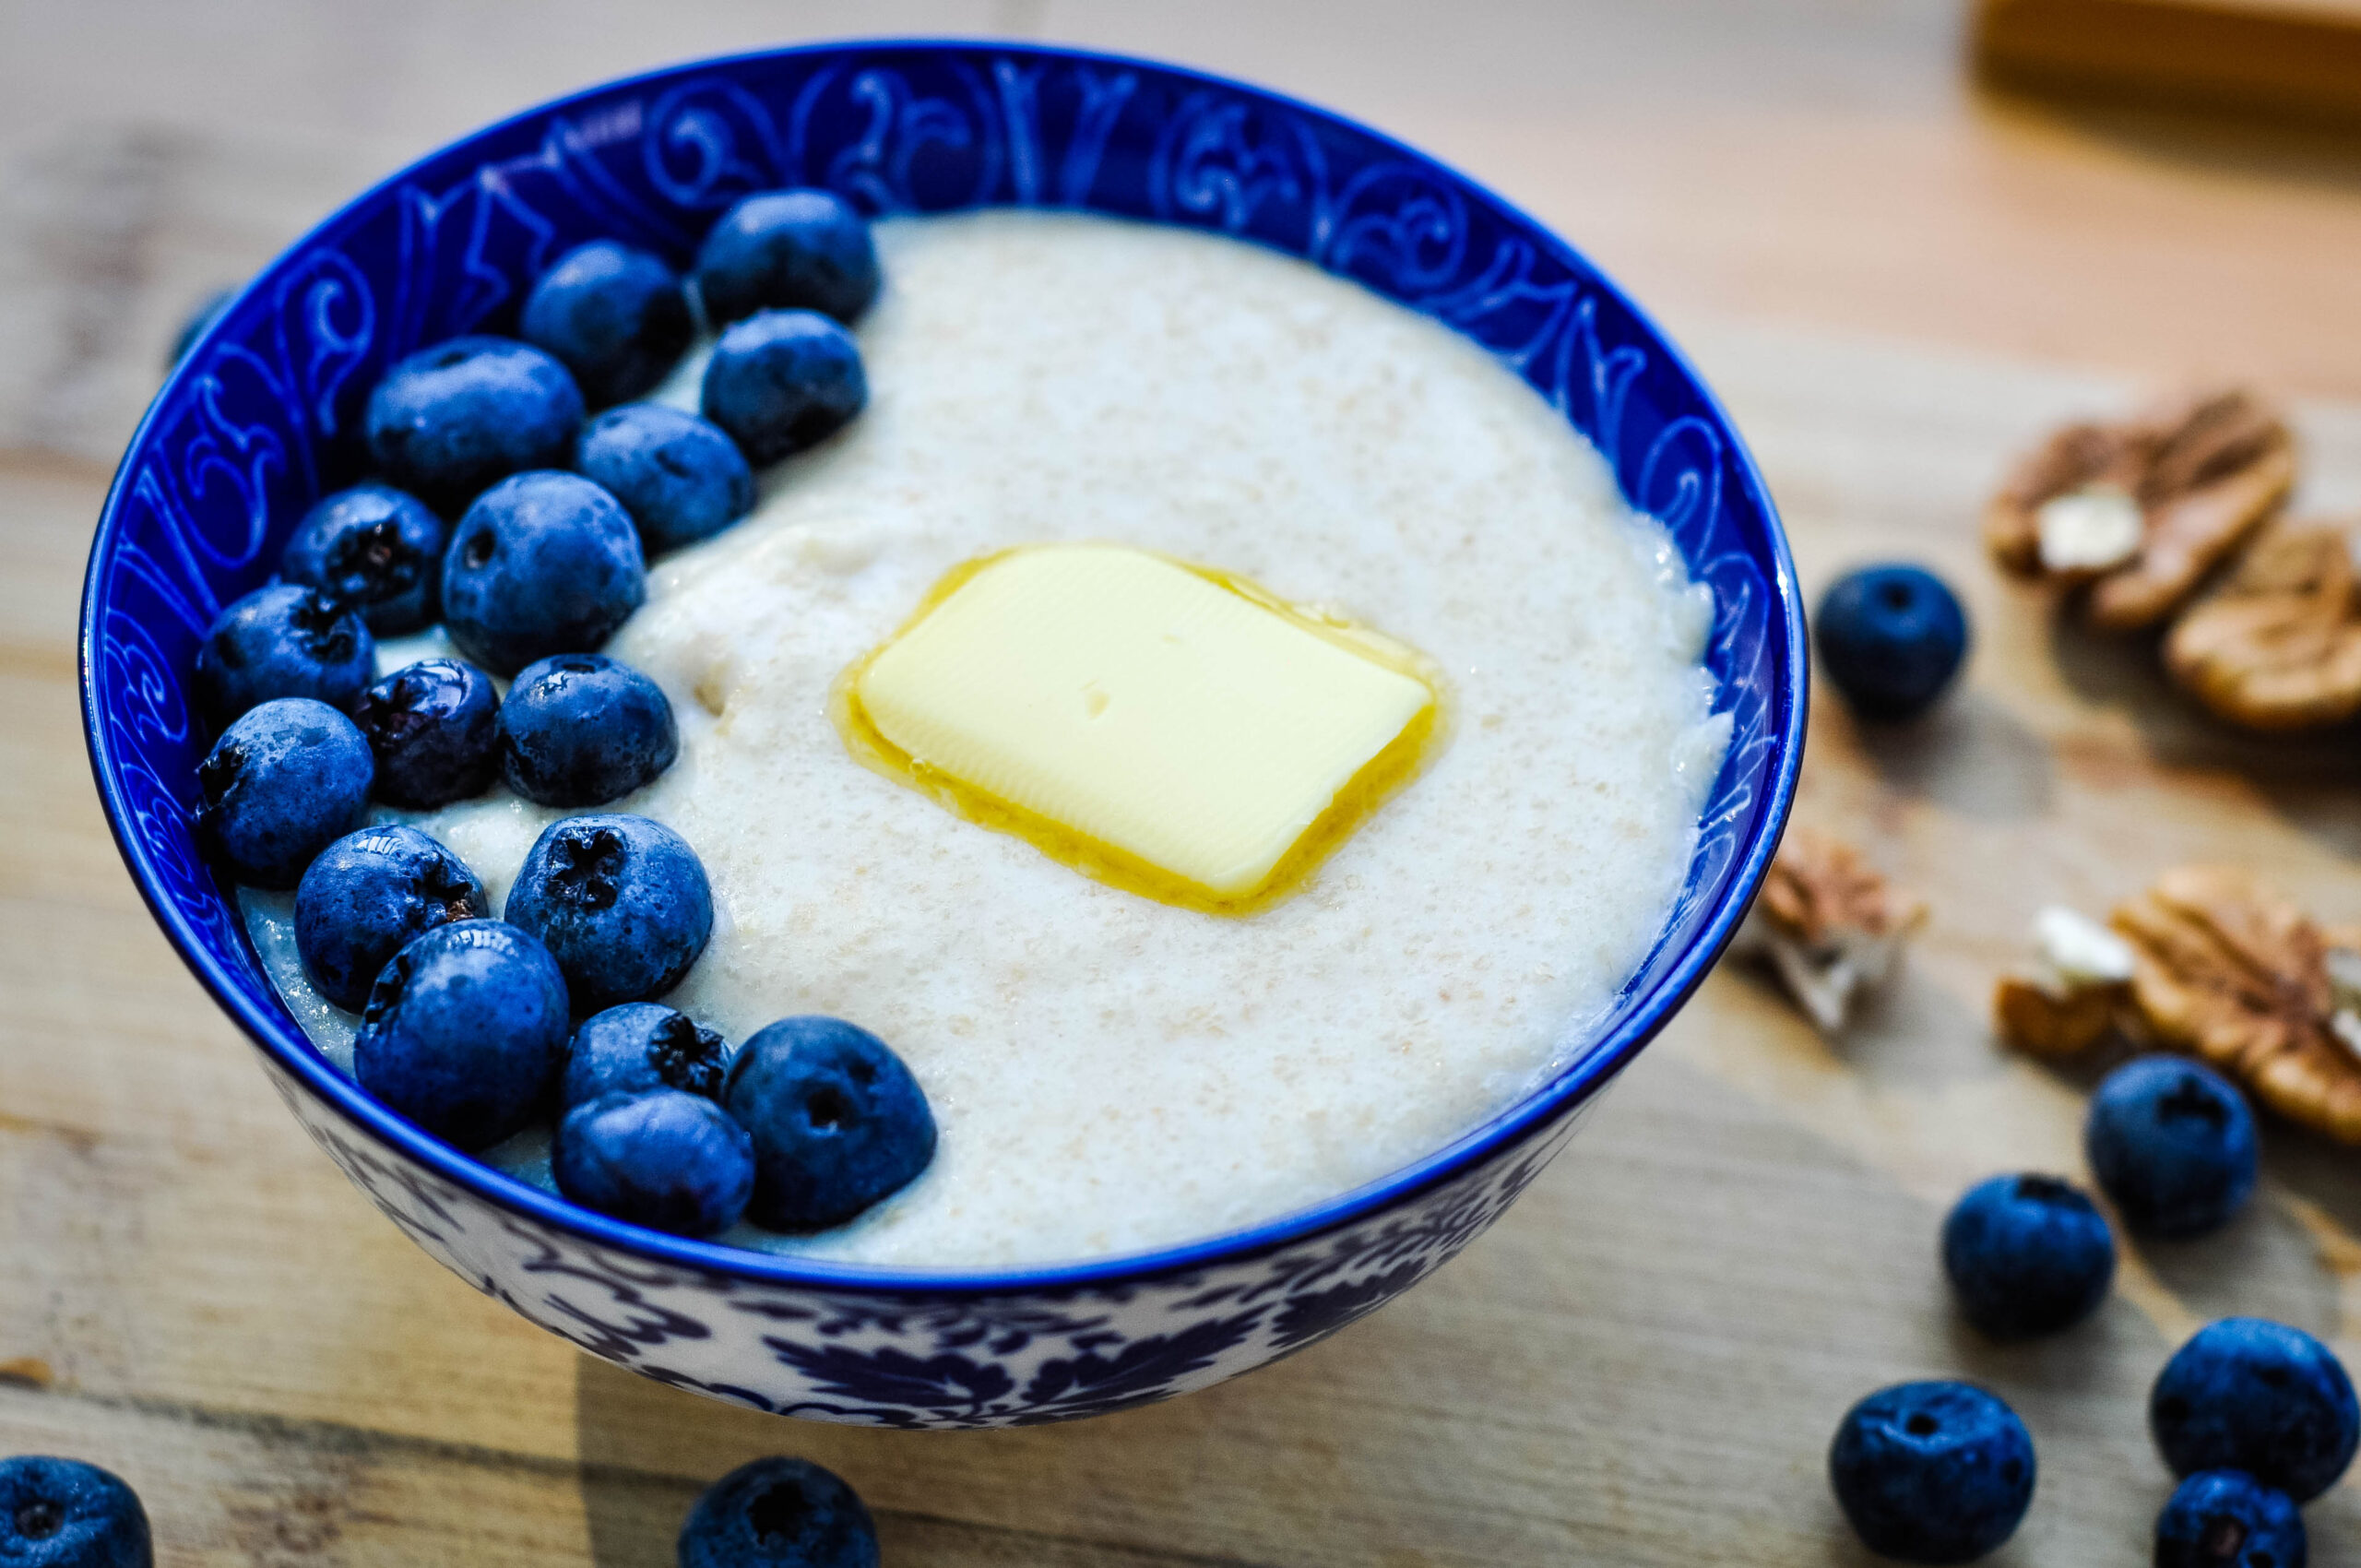 https://healthychristianhome.com/wp-content/uploads/2020/08/cream-of-wheat-1-scaled.jpg